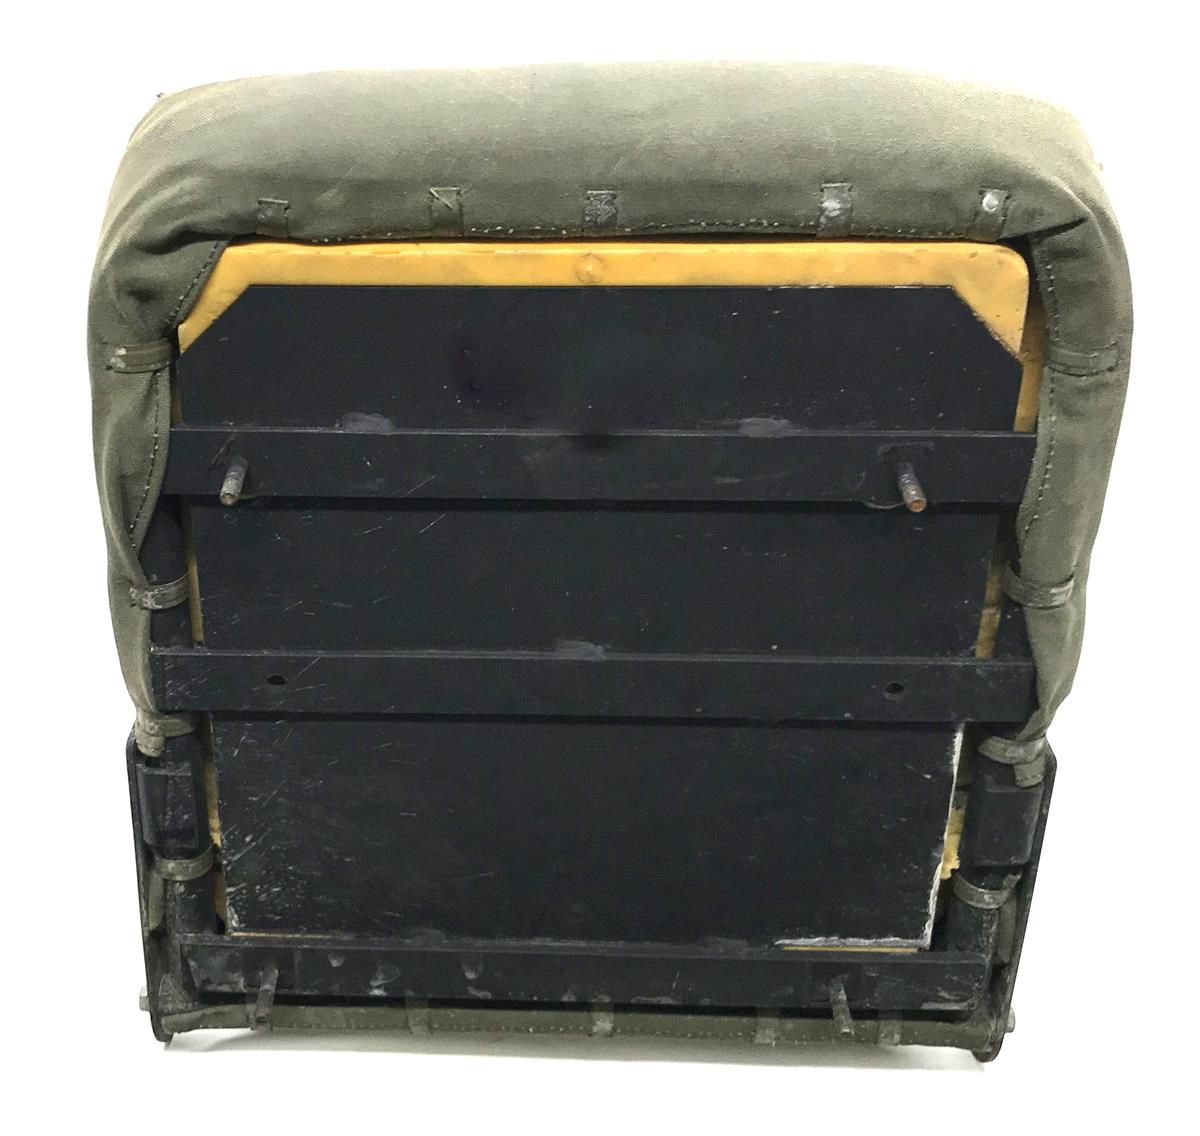 HM-131 | HM-131  HMMWV Seat - Driver Front and Passenger Rear Positions  (9).jpg